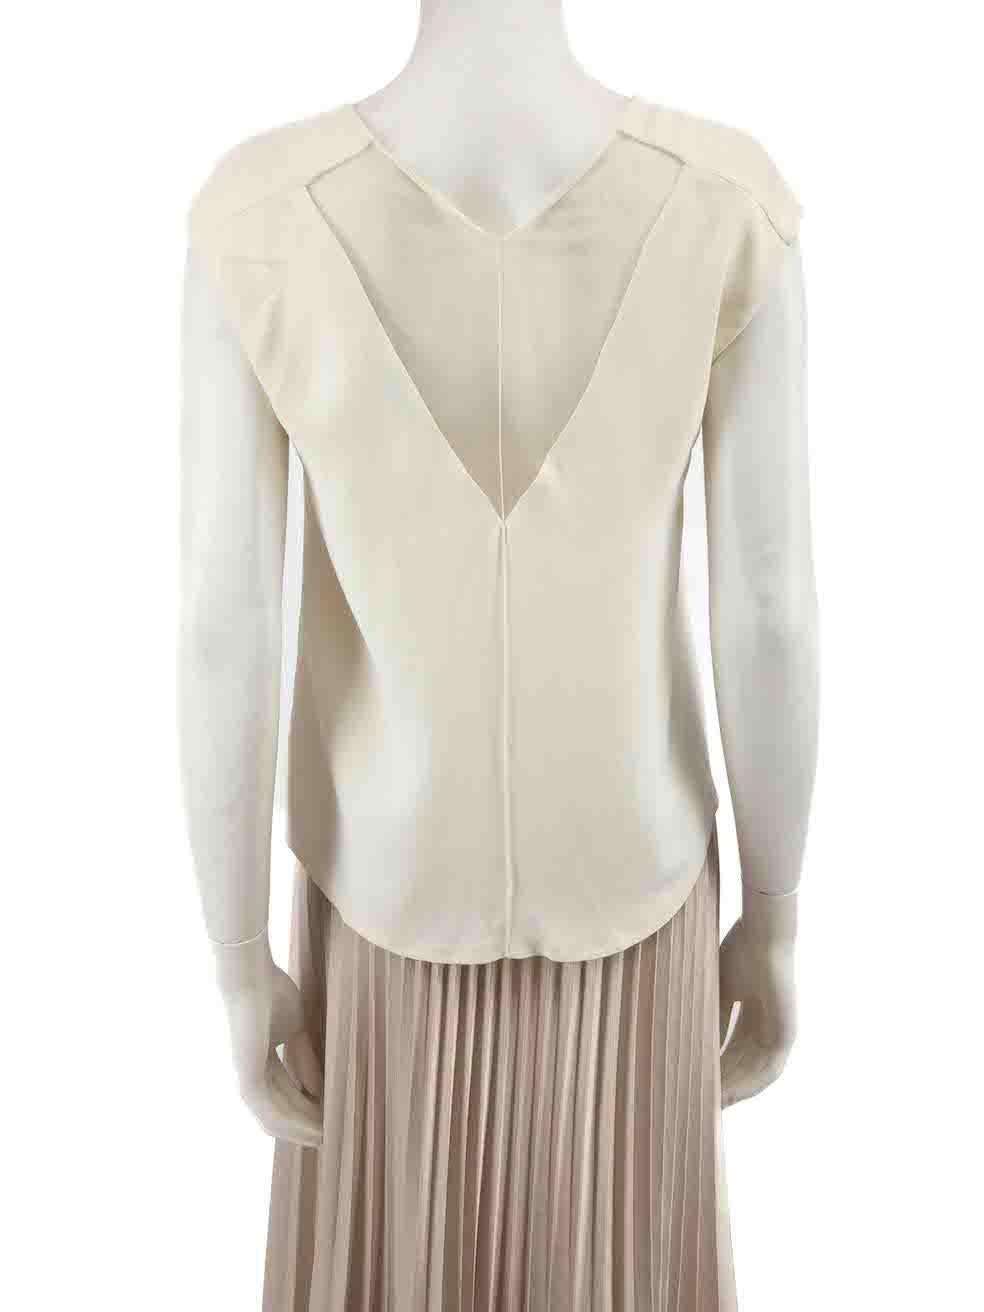 Sandro Cream Sleeveless Sheer Panel Top Size S In Good Condition For Sale In London, GB